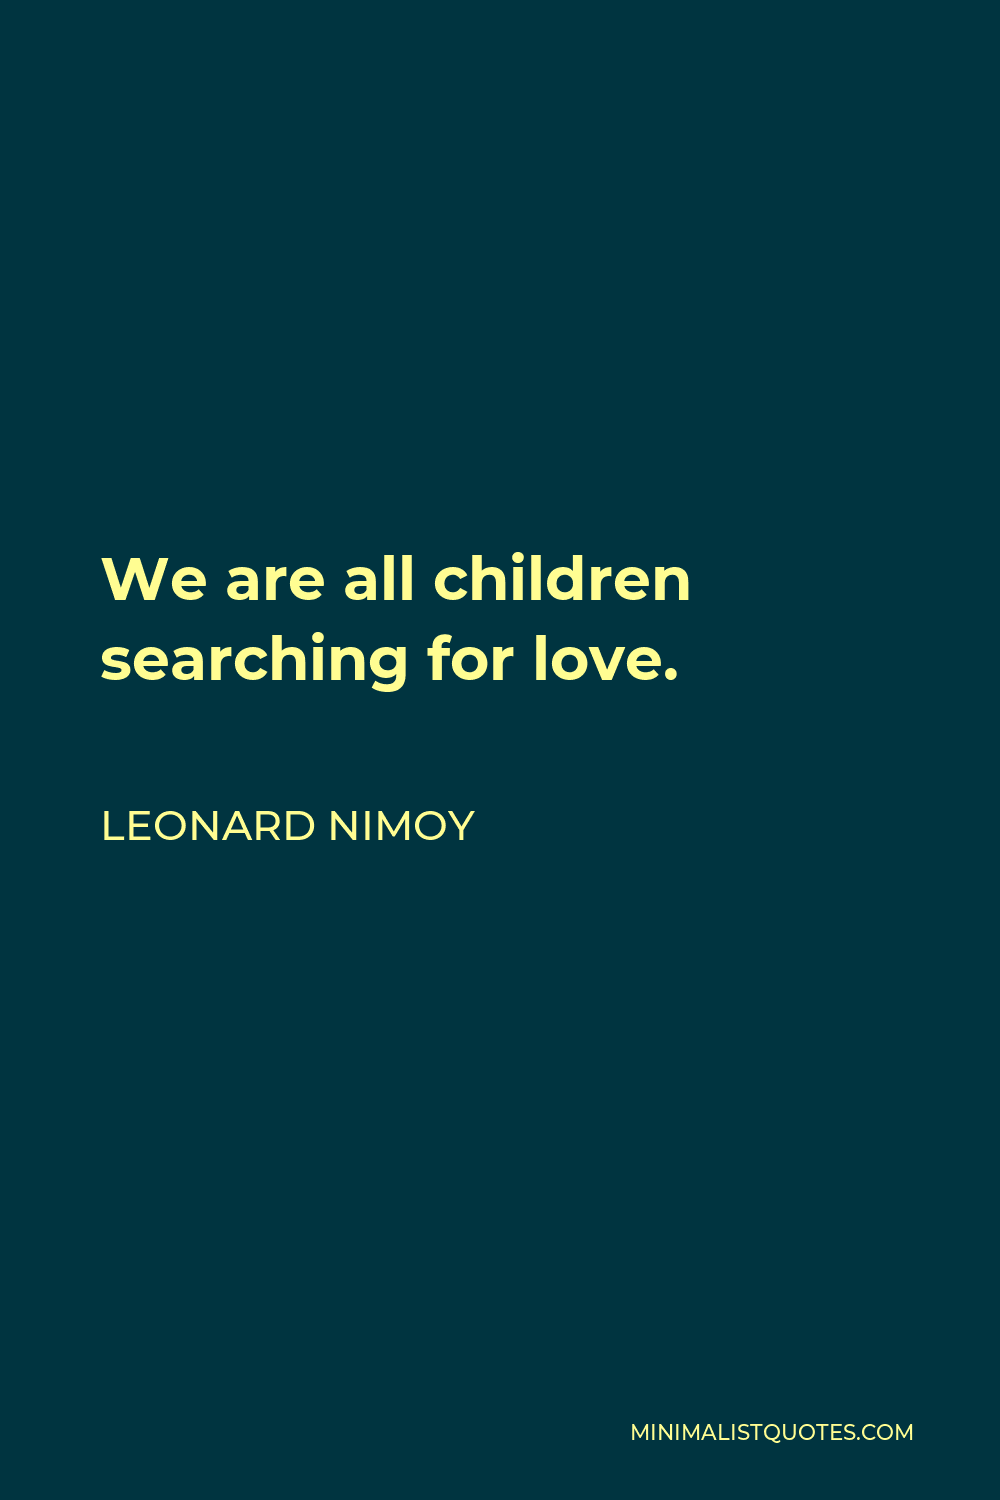 Leonard Nimoy Quote - We are all children searching for love.